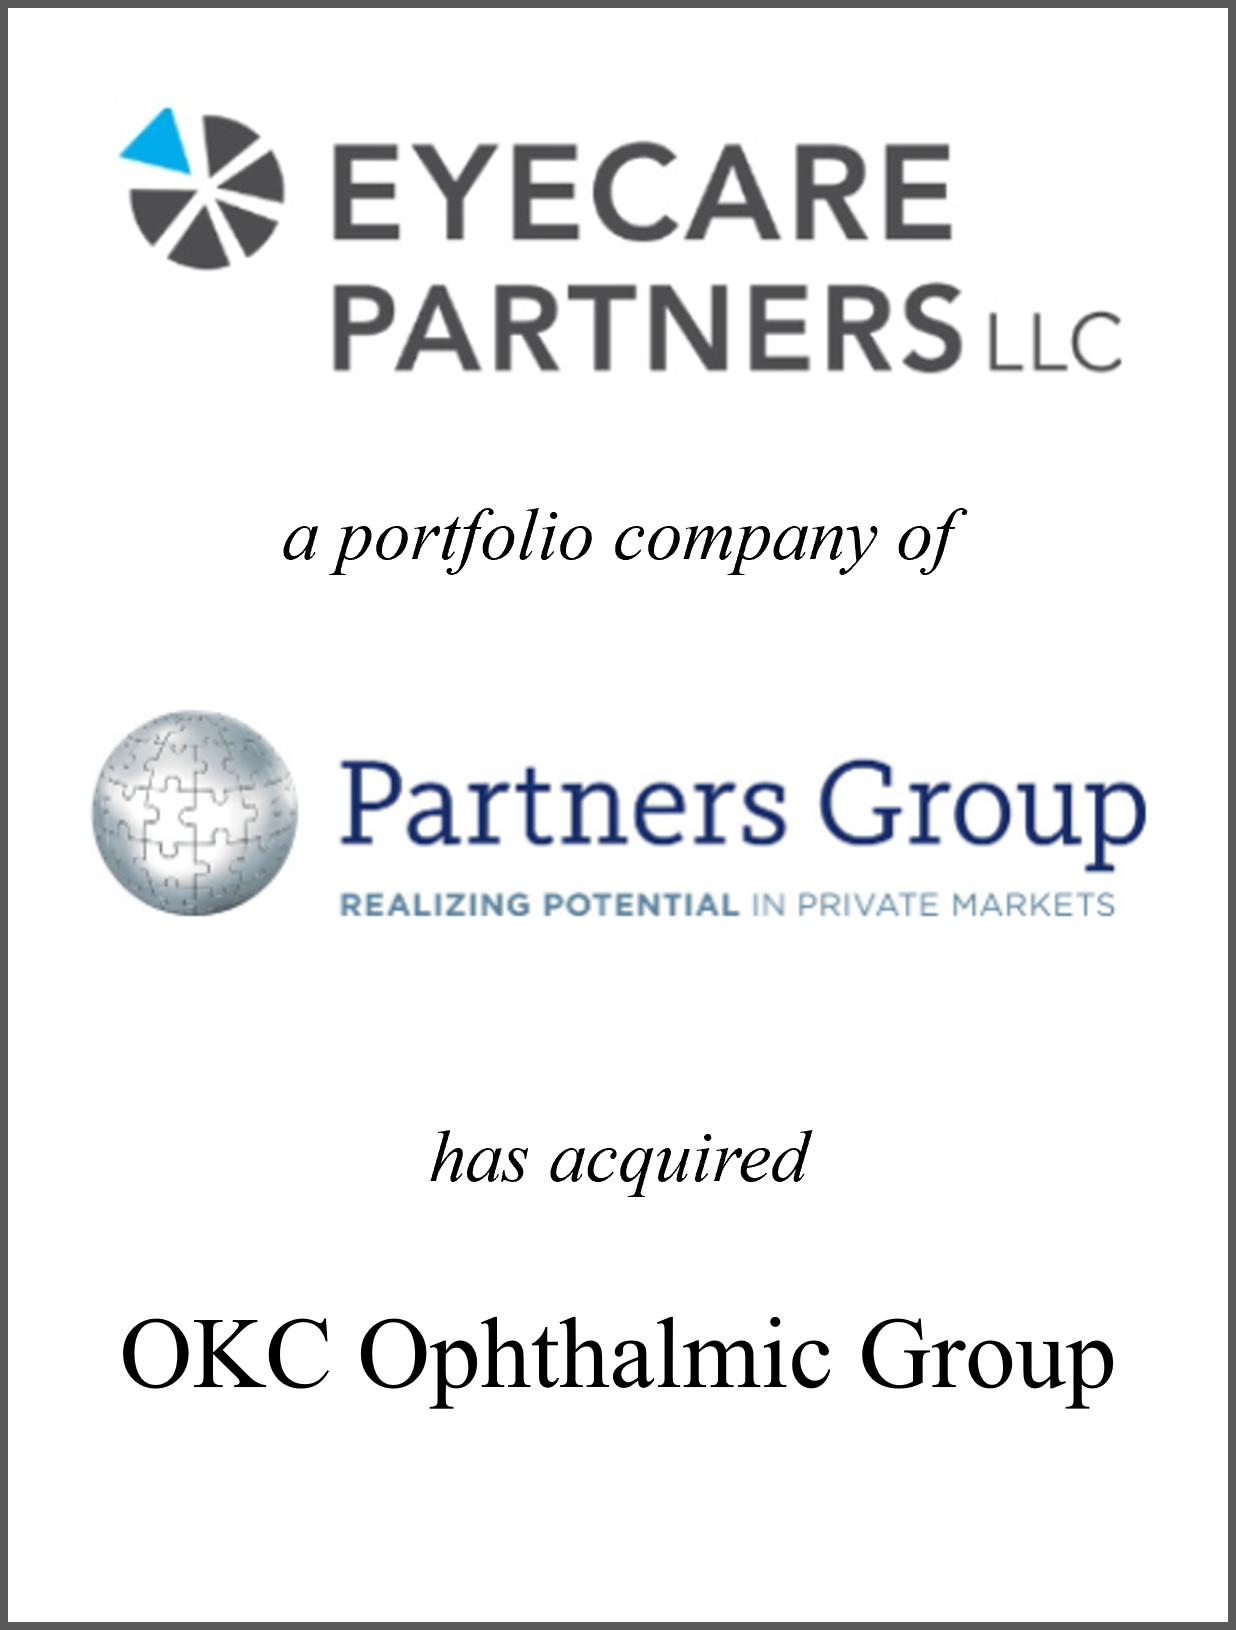 OKC Ophthalmic Group